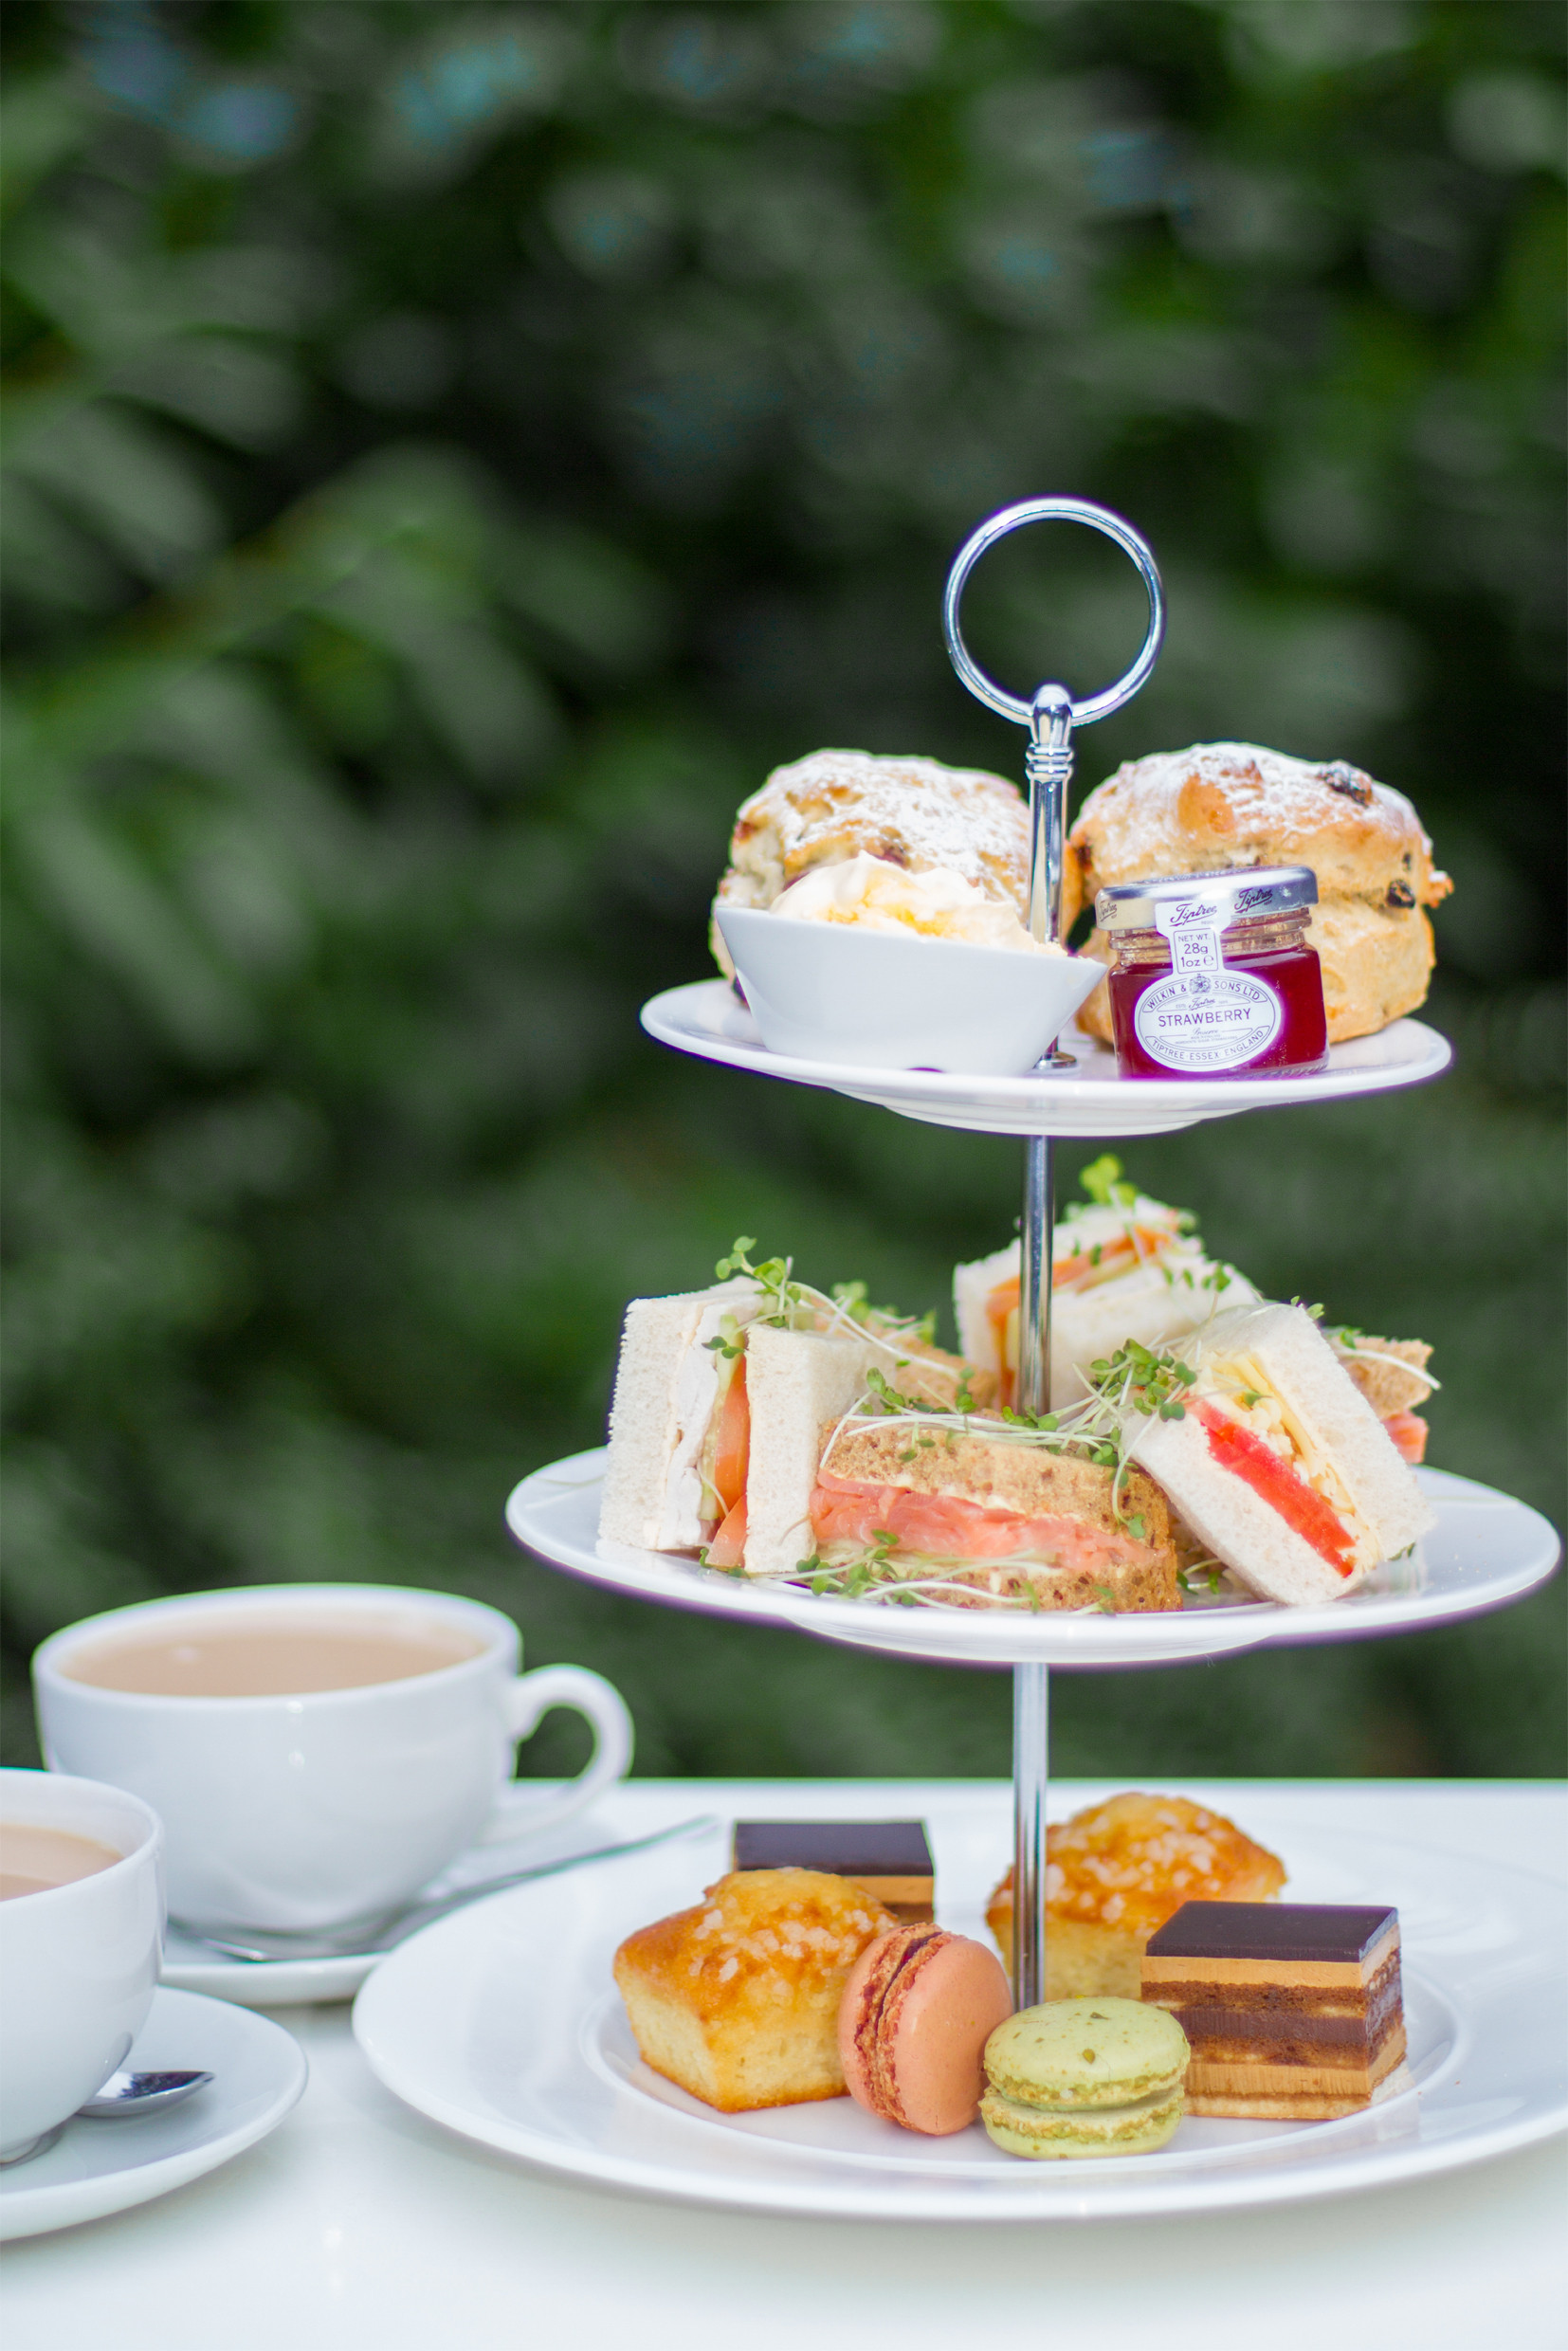 Afternoon Tea Party Ideas
 Why the UK is hungrier that ever for afternoon tea